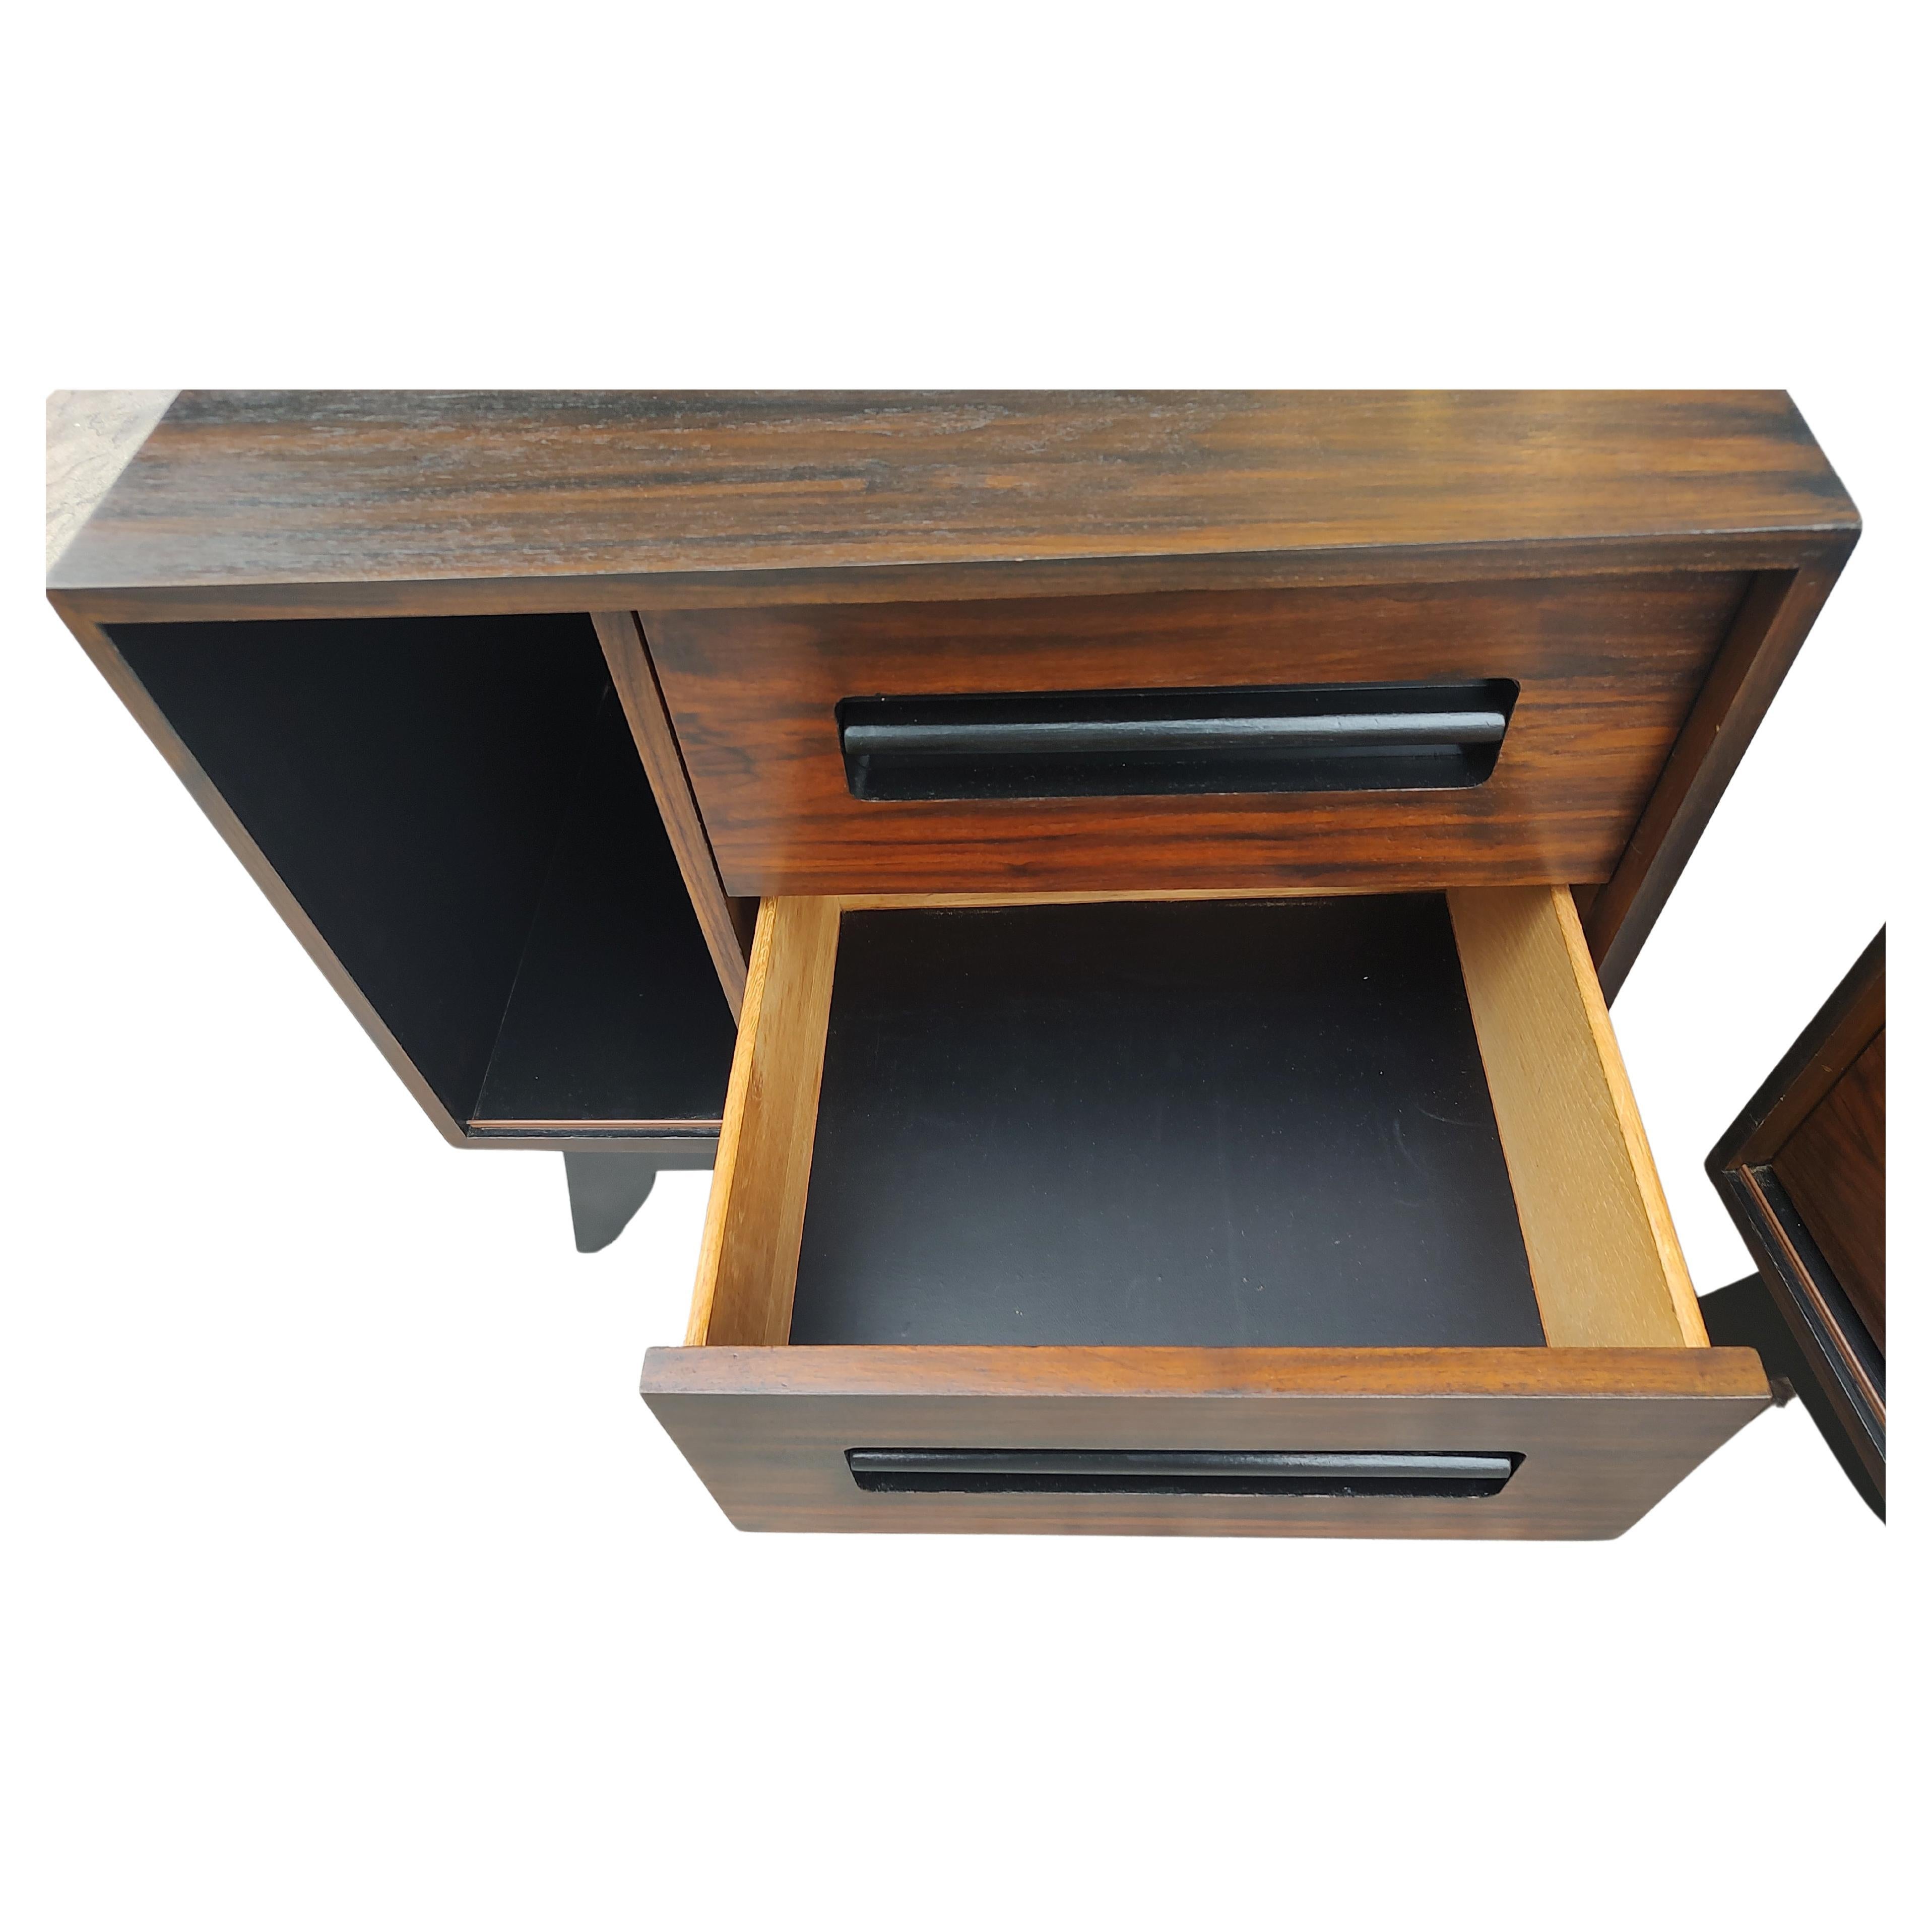 Fabulous pair of Mid-Century Modern Sculptural Scandinavian Rosewood and Black Lacquer nightstands. Two drawers & a opening for having a space at the ready. In excellent vintage condition with minimal wear. These were refinished not long ago. Sold